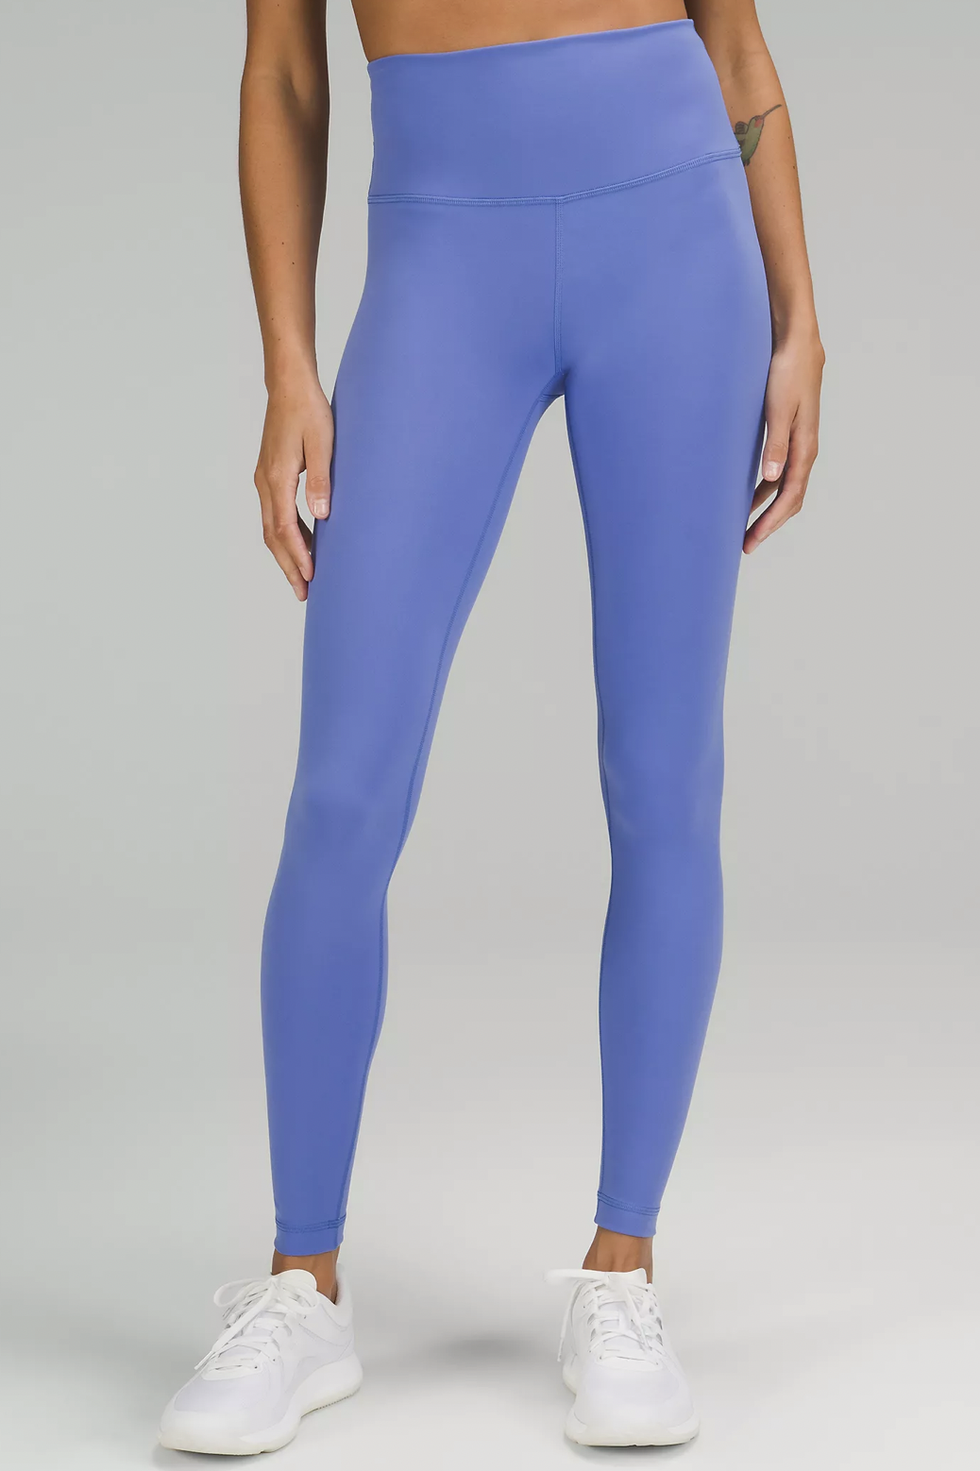 Latest spandex workout leggings girls in